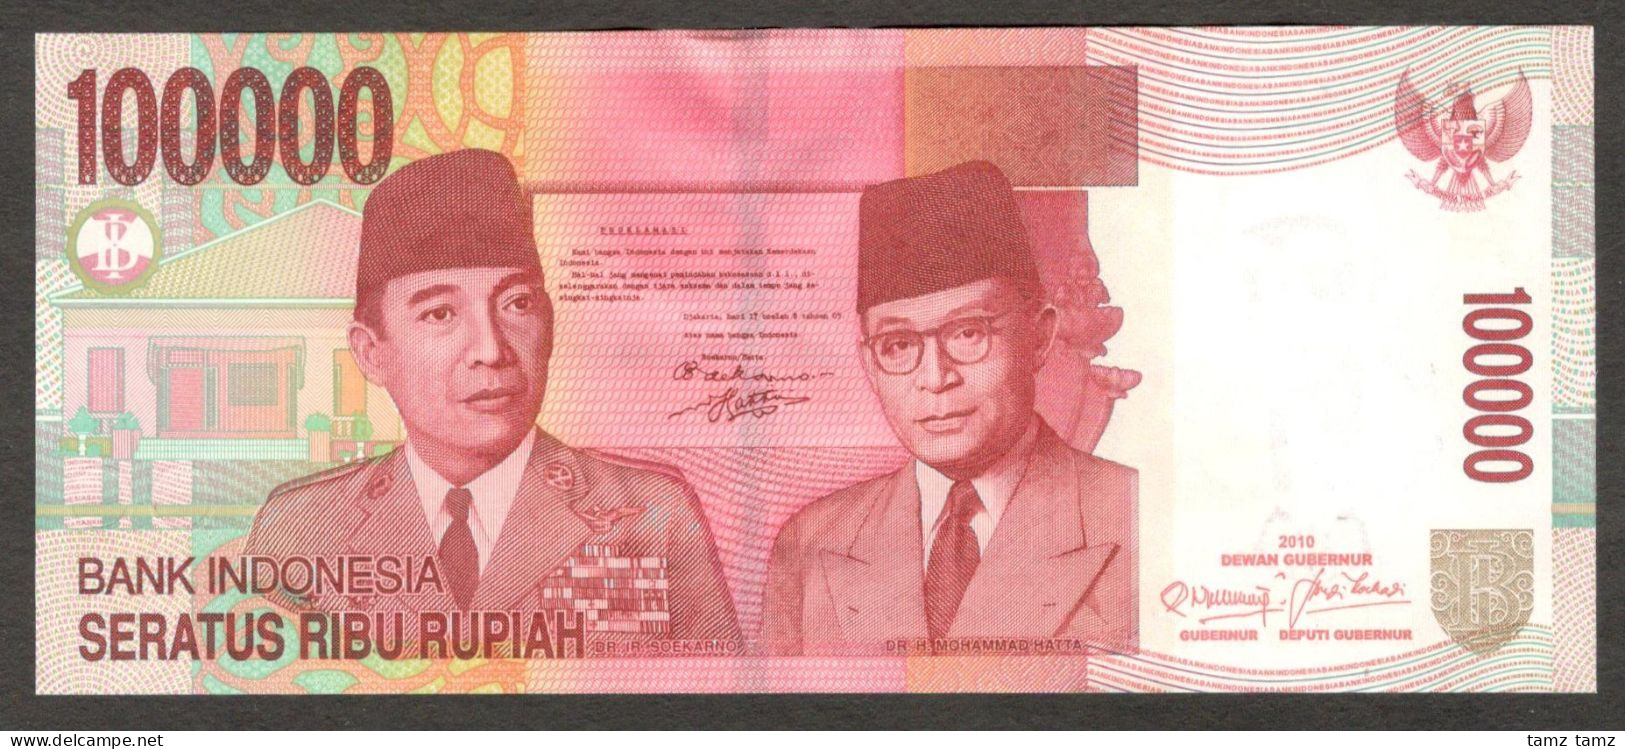 Indonesia 100000 100,000 Rupiah Replacement W/o Omron Rings P-146g* 2010/2004 UNC - Indonesia